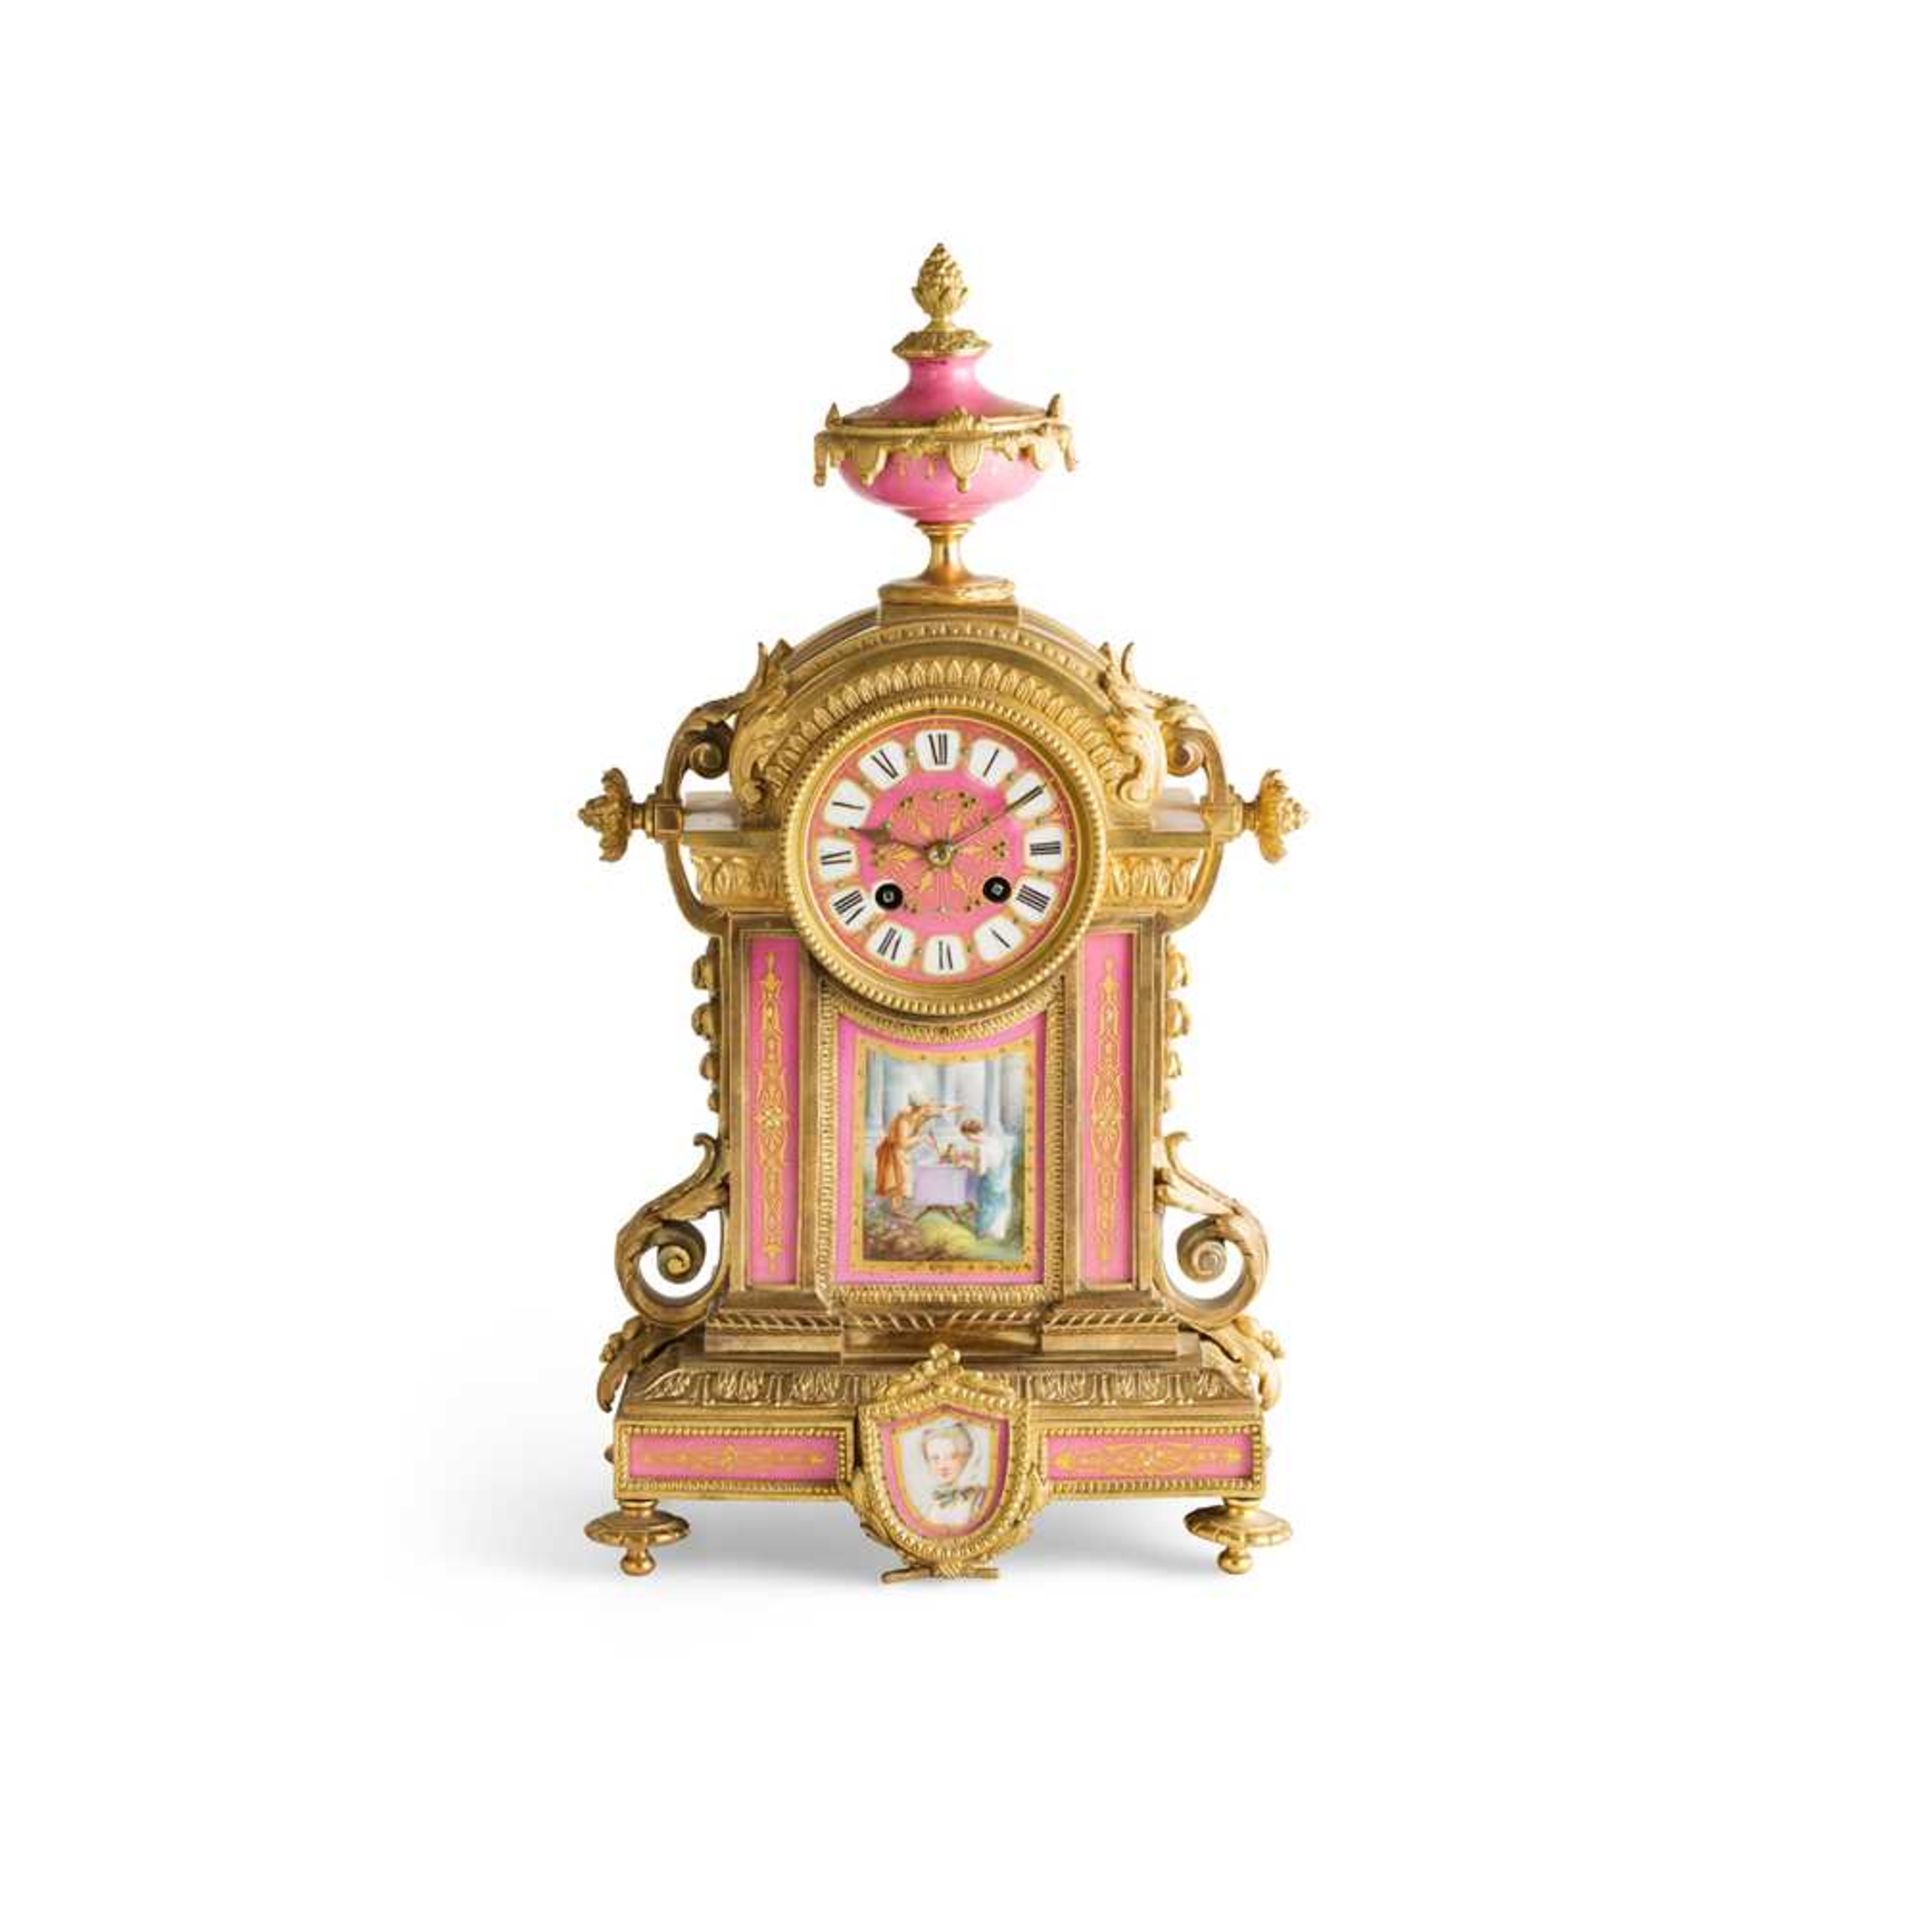 FRENCH GILT BRONZE AND PORCELAIN MANTEL CLOCK 19TH CENTURY